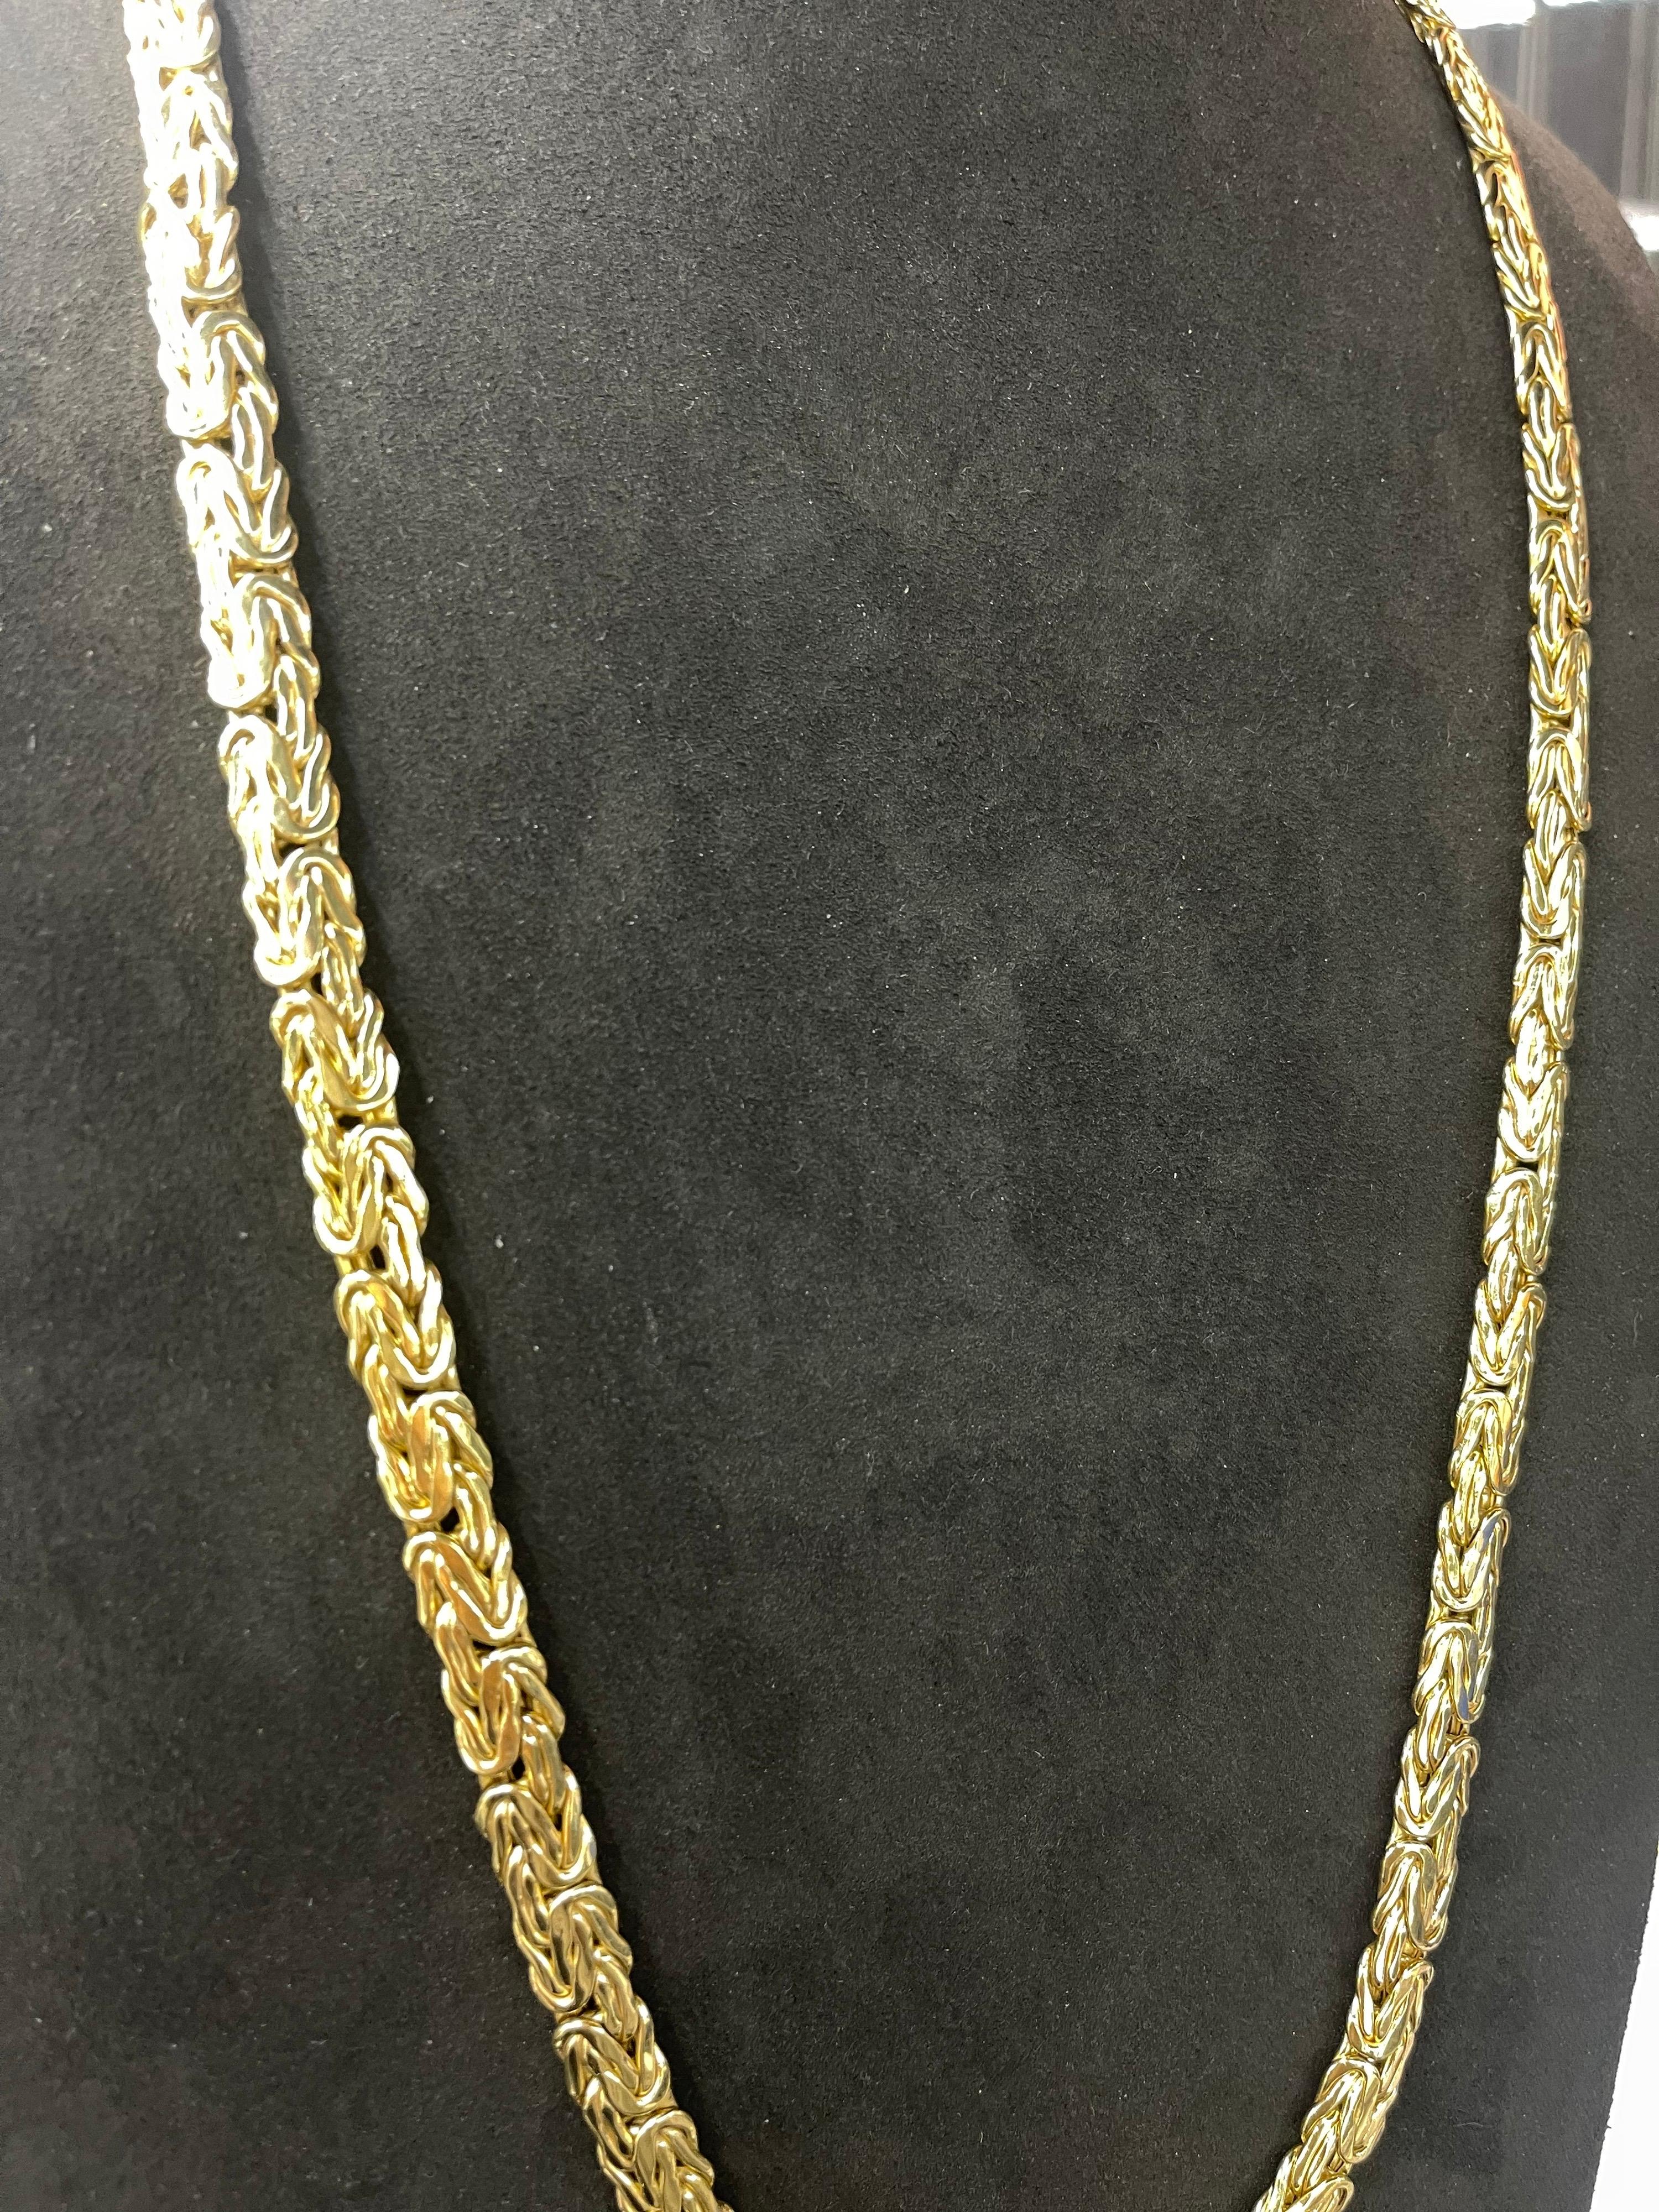 Women's or Men's Interlocking Chain Gold Necklace 29 Inches 14 Karat Yellow Gold 54 Grams For Sale